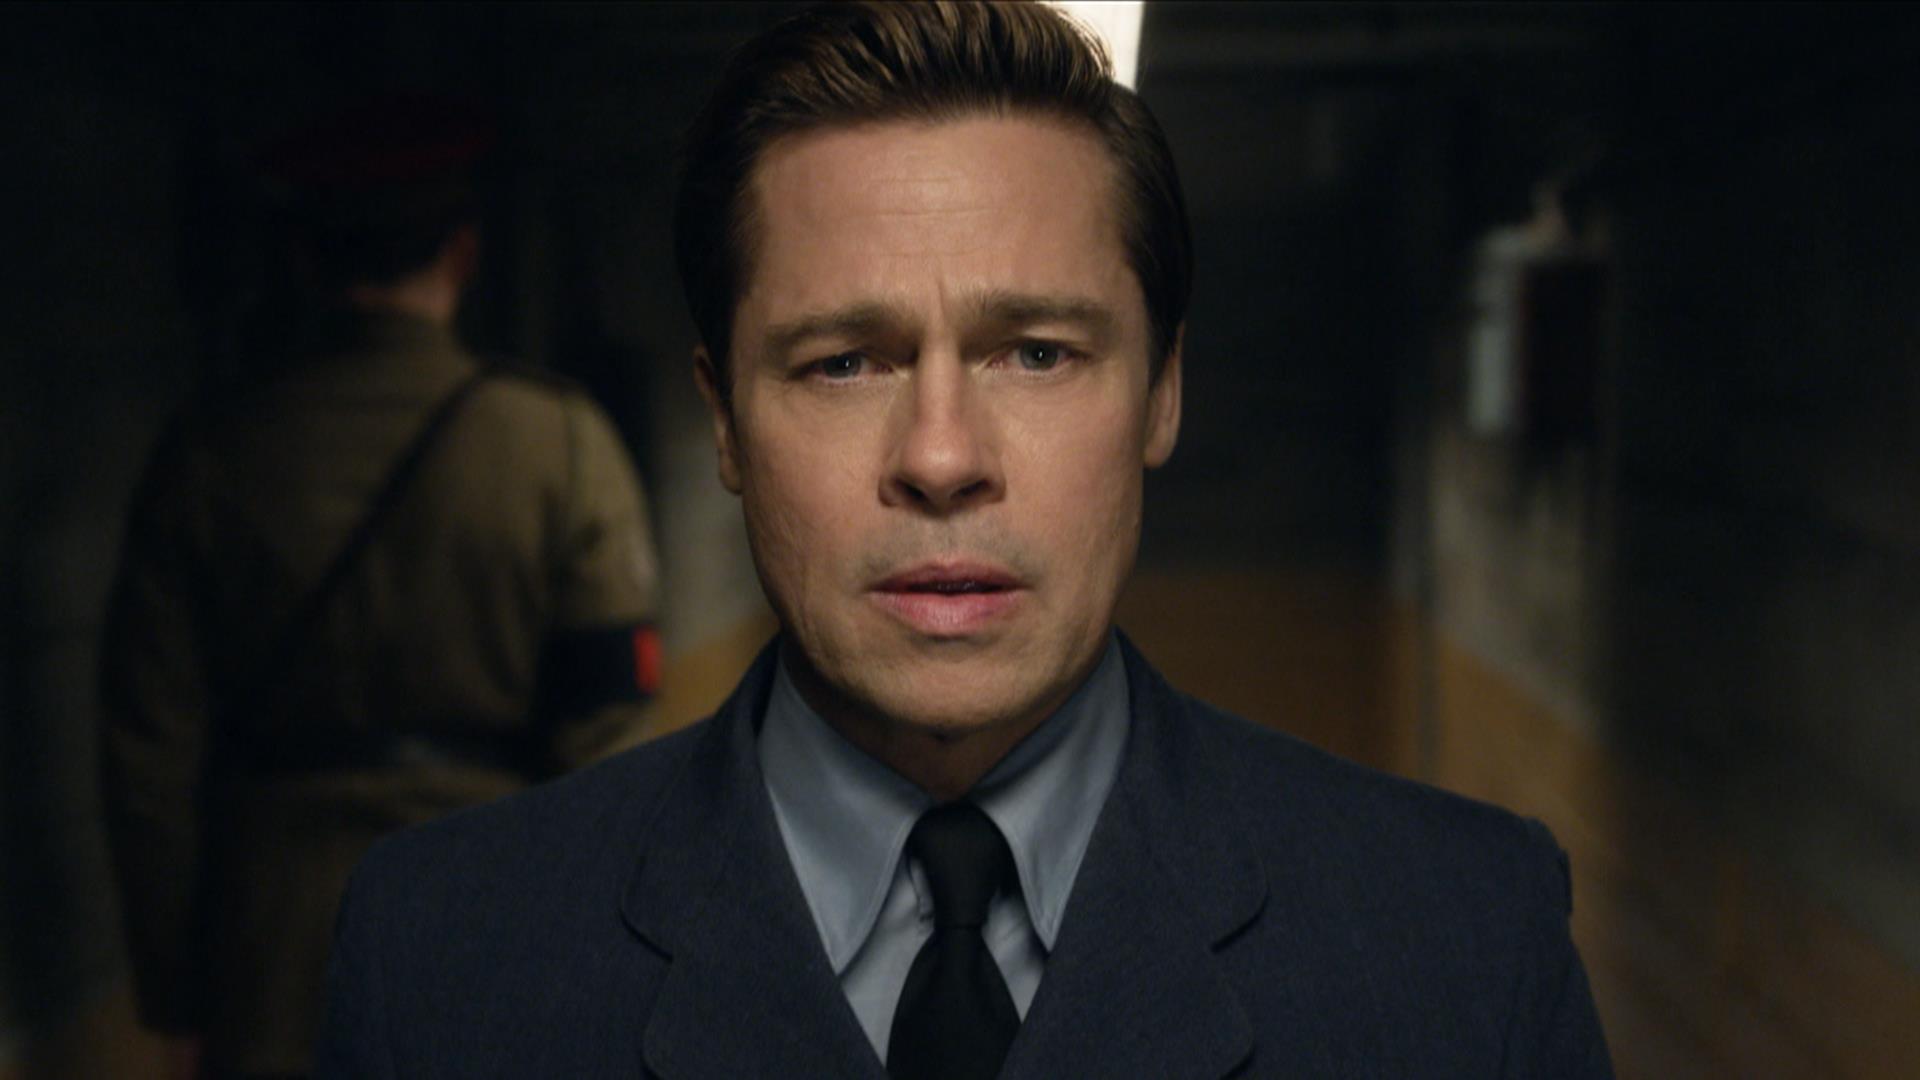 Watch Brad Pitt in exclusive first look at ‘Allied’ - TODAY.com